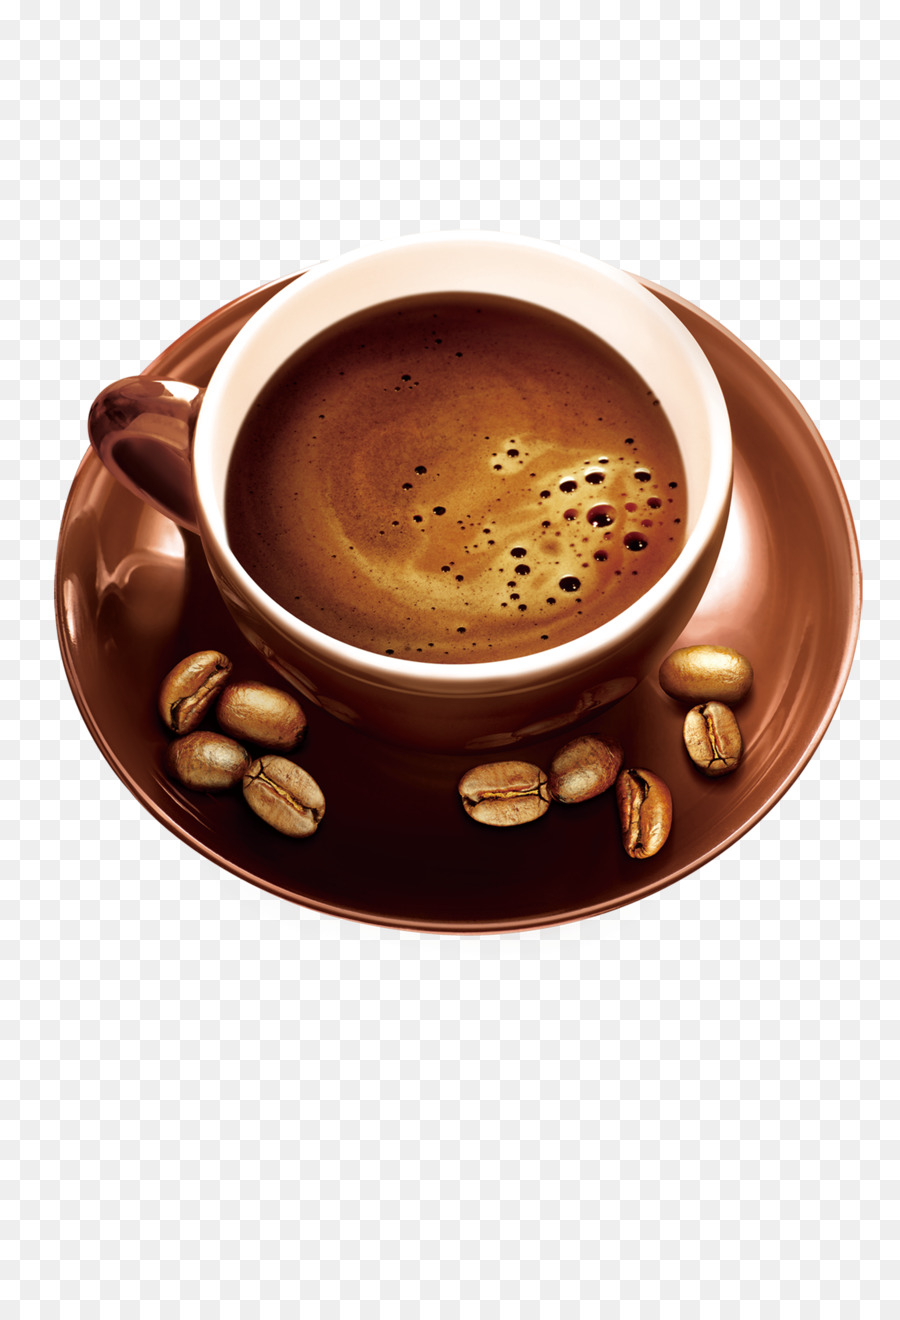 Coffee Espresso Cappuccino Latte Caffxe8 Americano - Coffee afternoon tea png download - 2362*3422 - Free Transparent Coffee png Download.